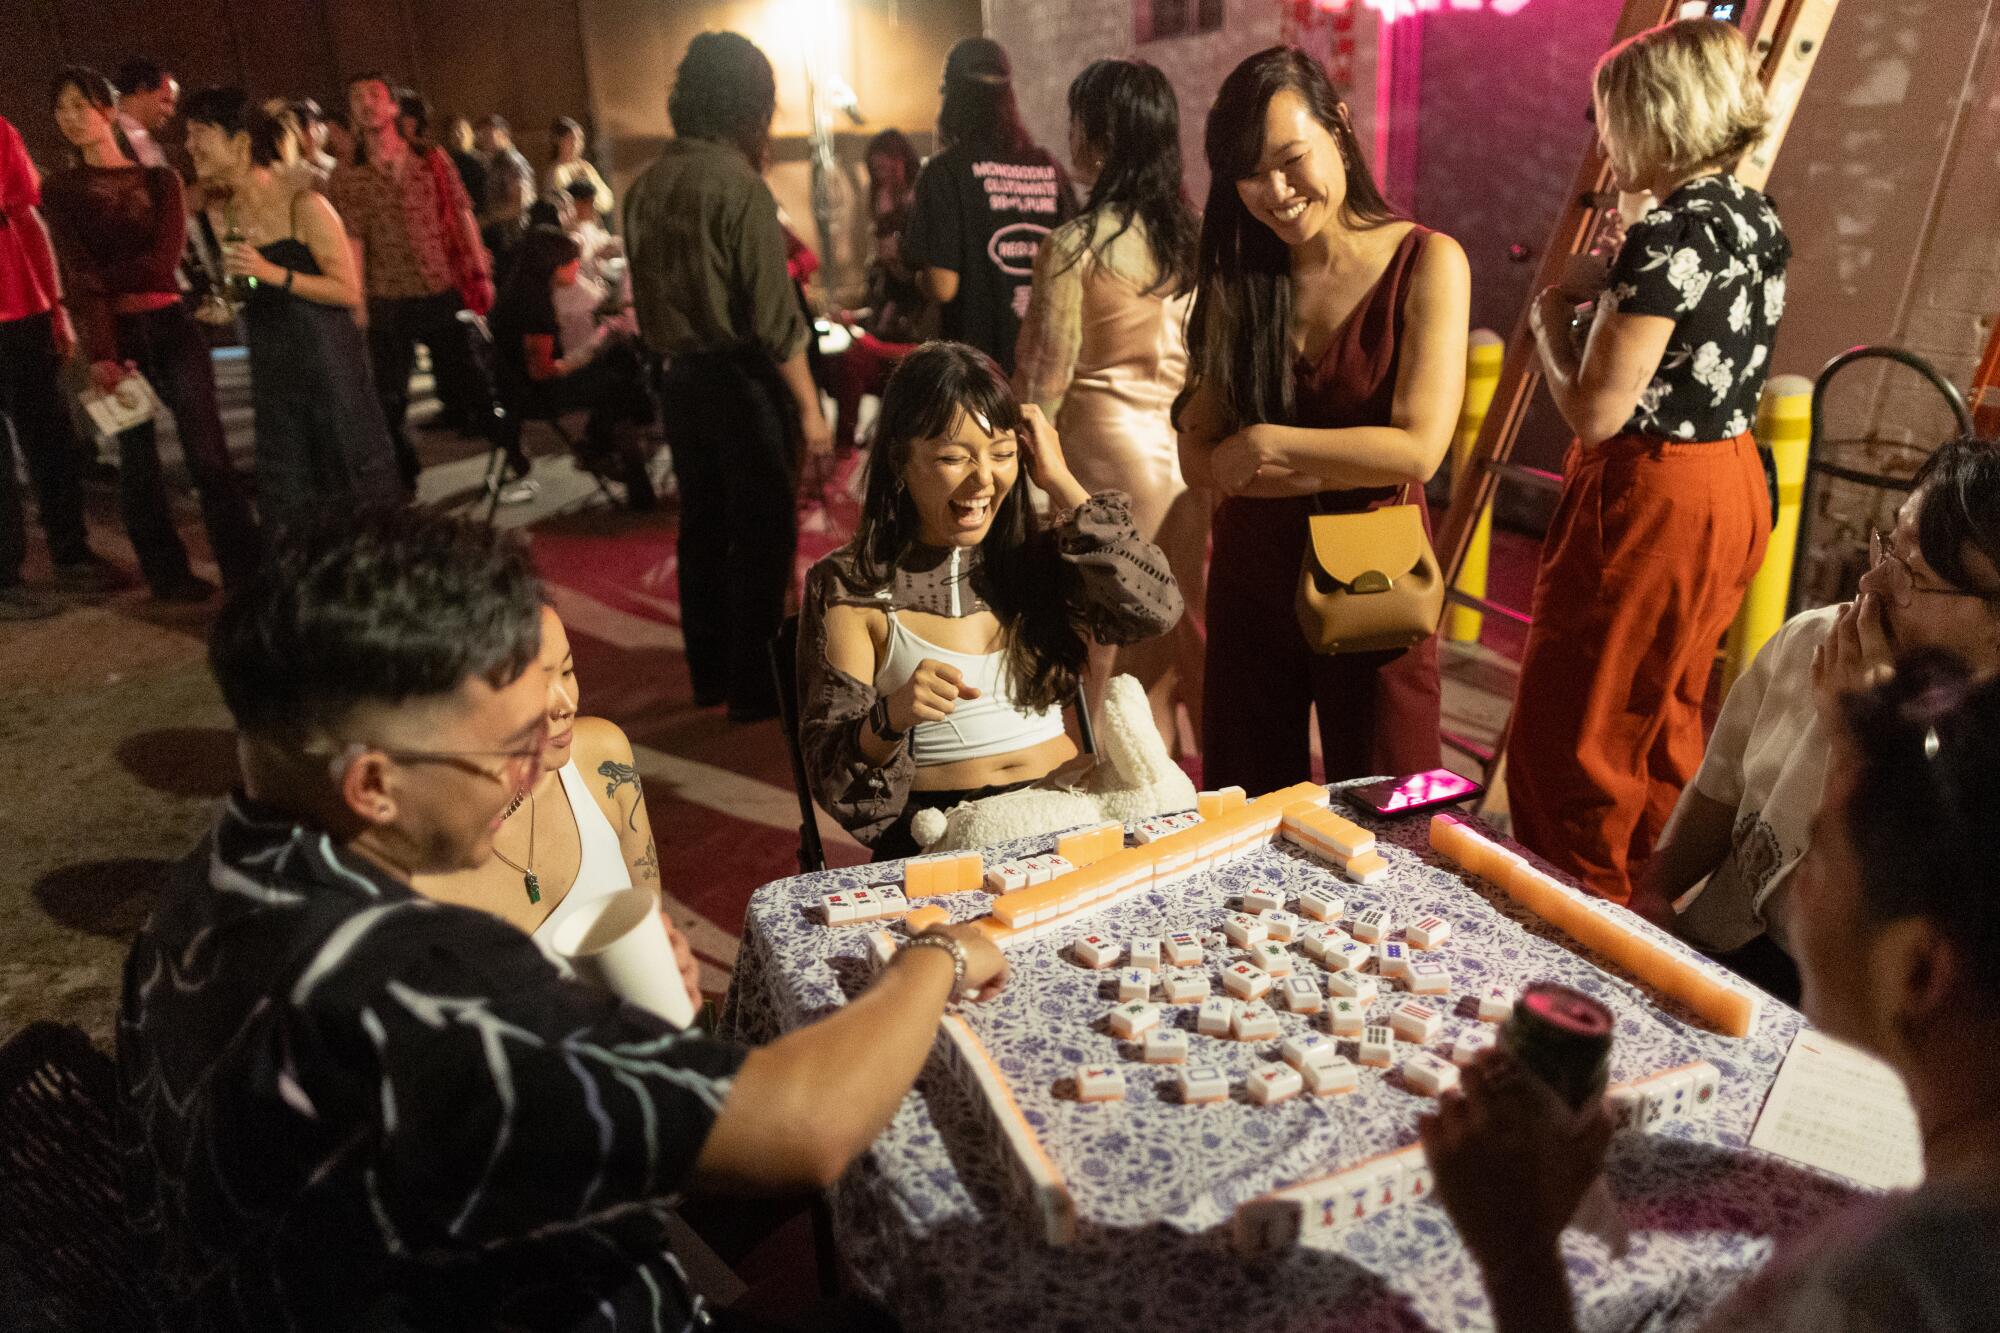 A large crowd of party-goers laugh and look on as mahjong players make their moves.